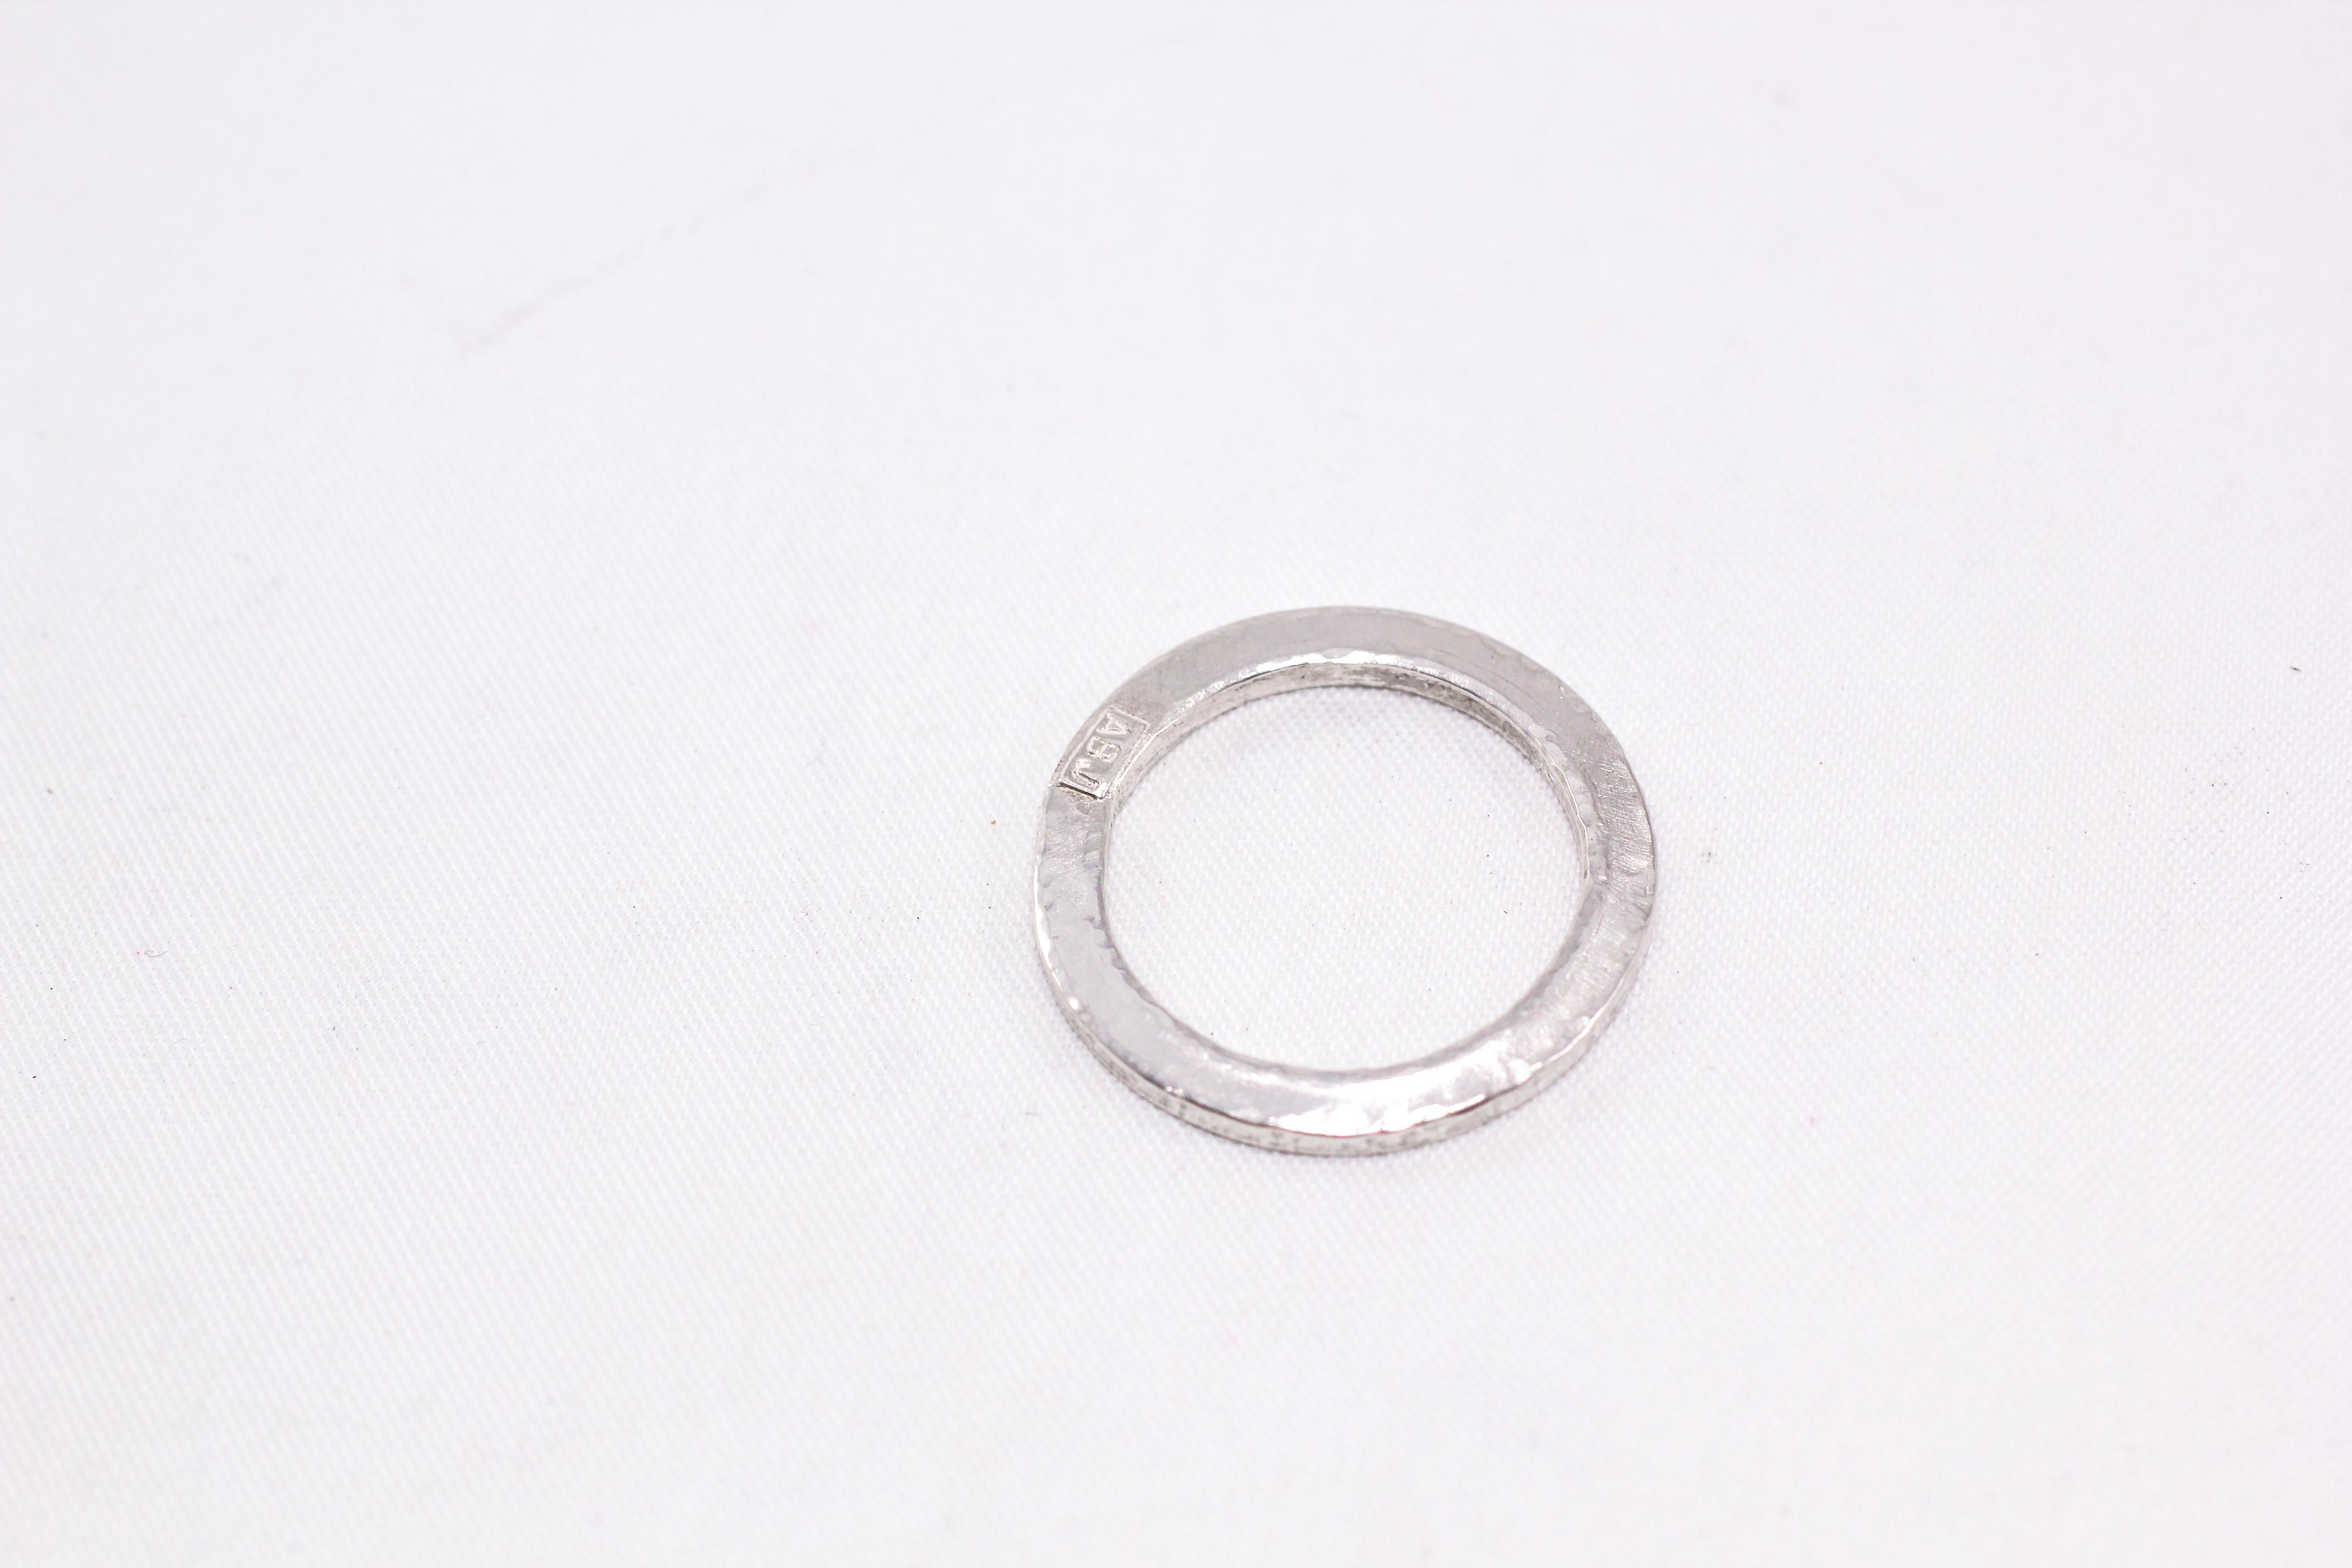 A fashion or a wedding ring in sterling silver. For more fashion ideas our Simplicity Large Disk contemporary band can also be worn as a stacking ring. Great as men's or women's contemporary design.

This striking ring is first hand-forged in 21k